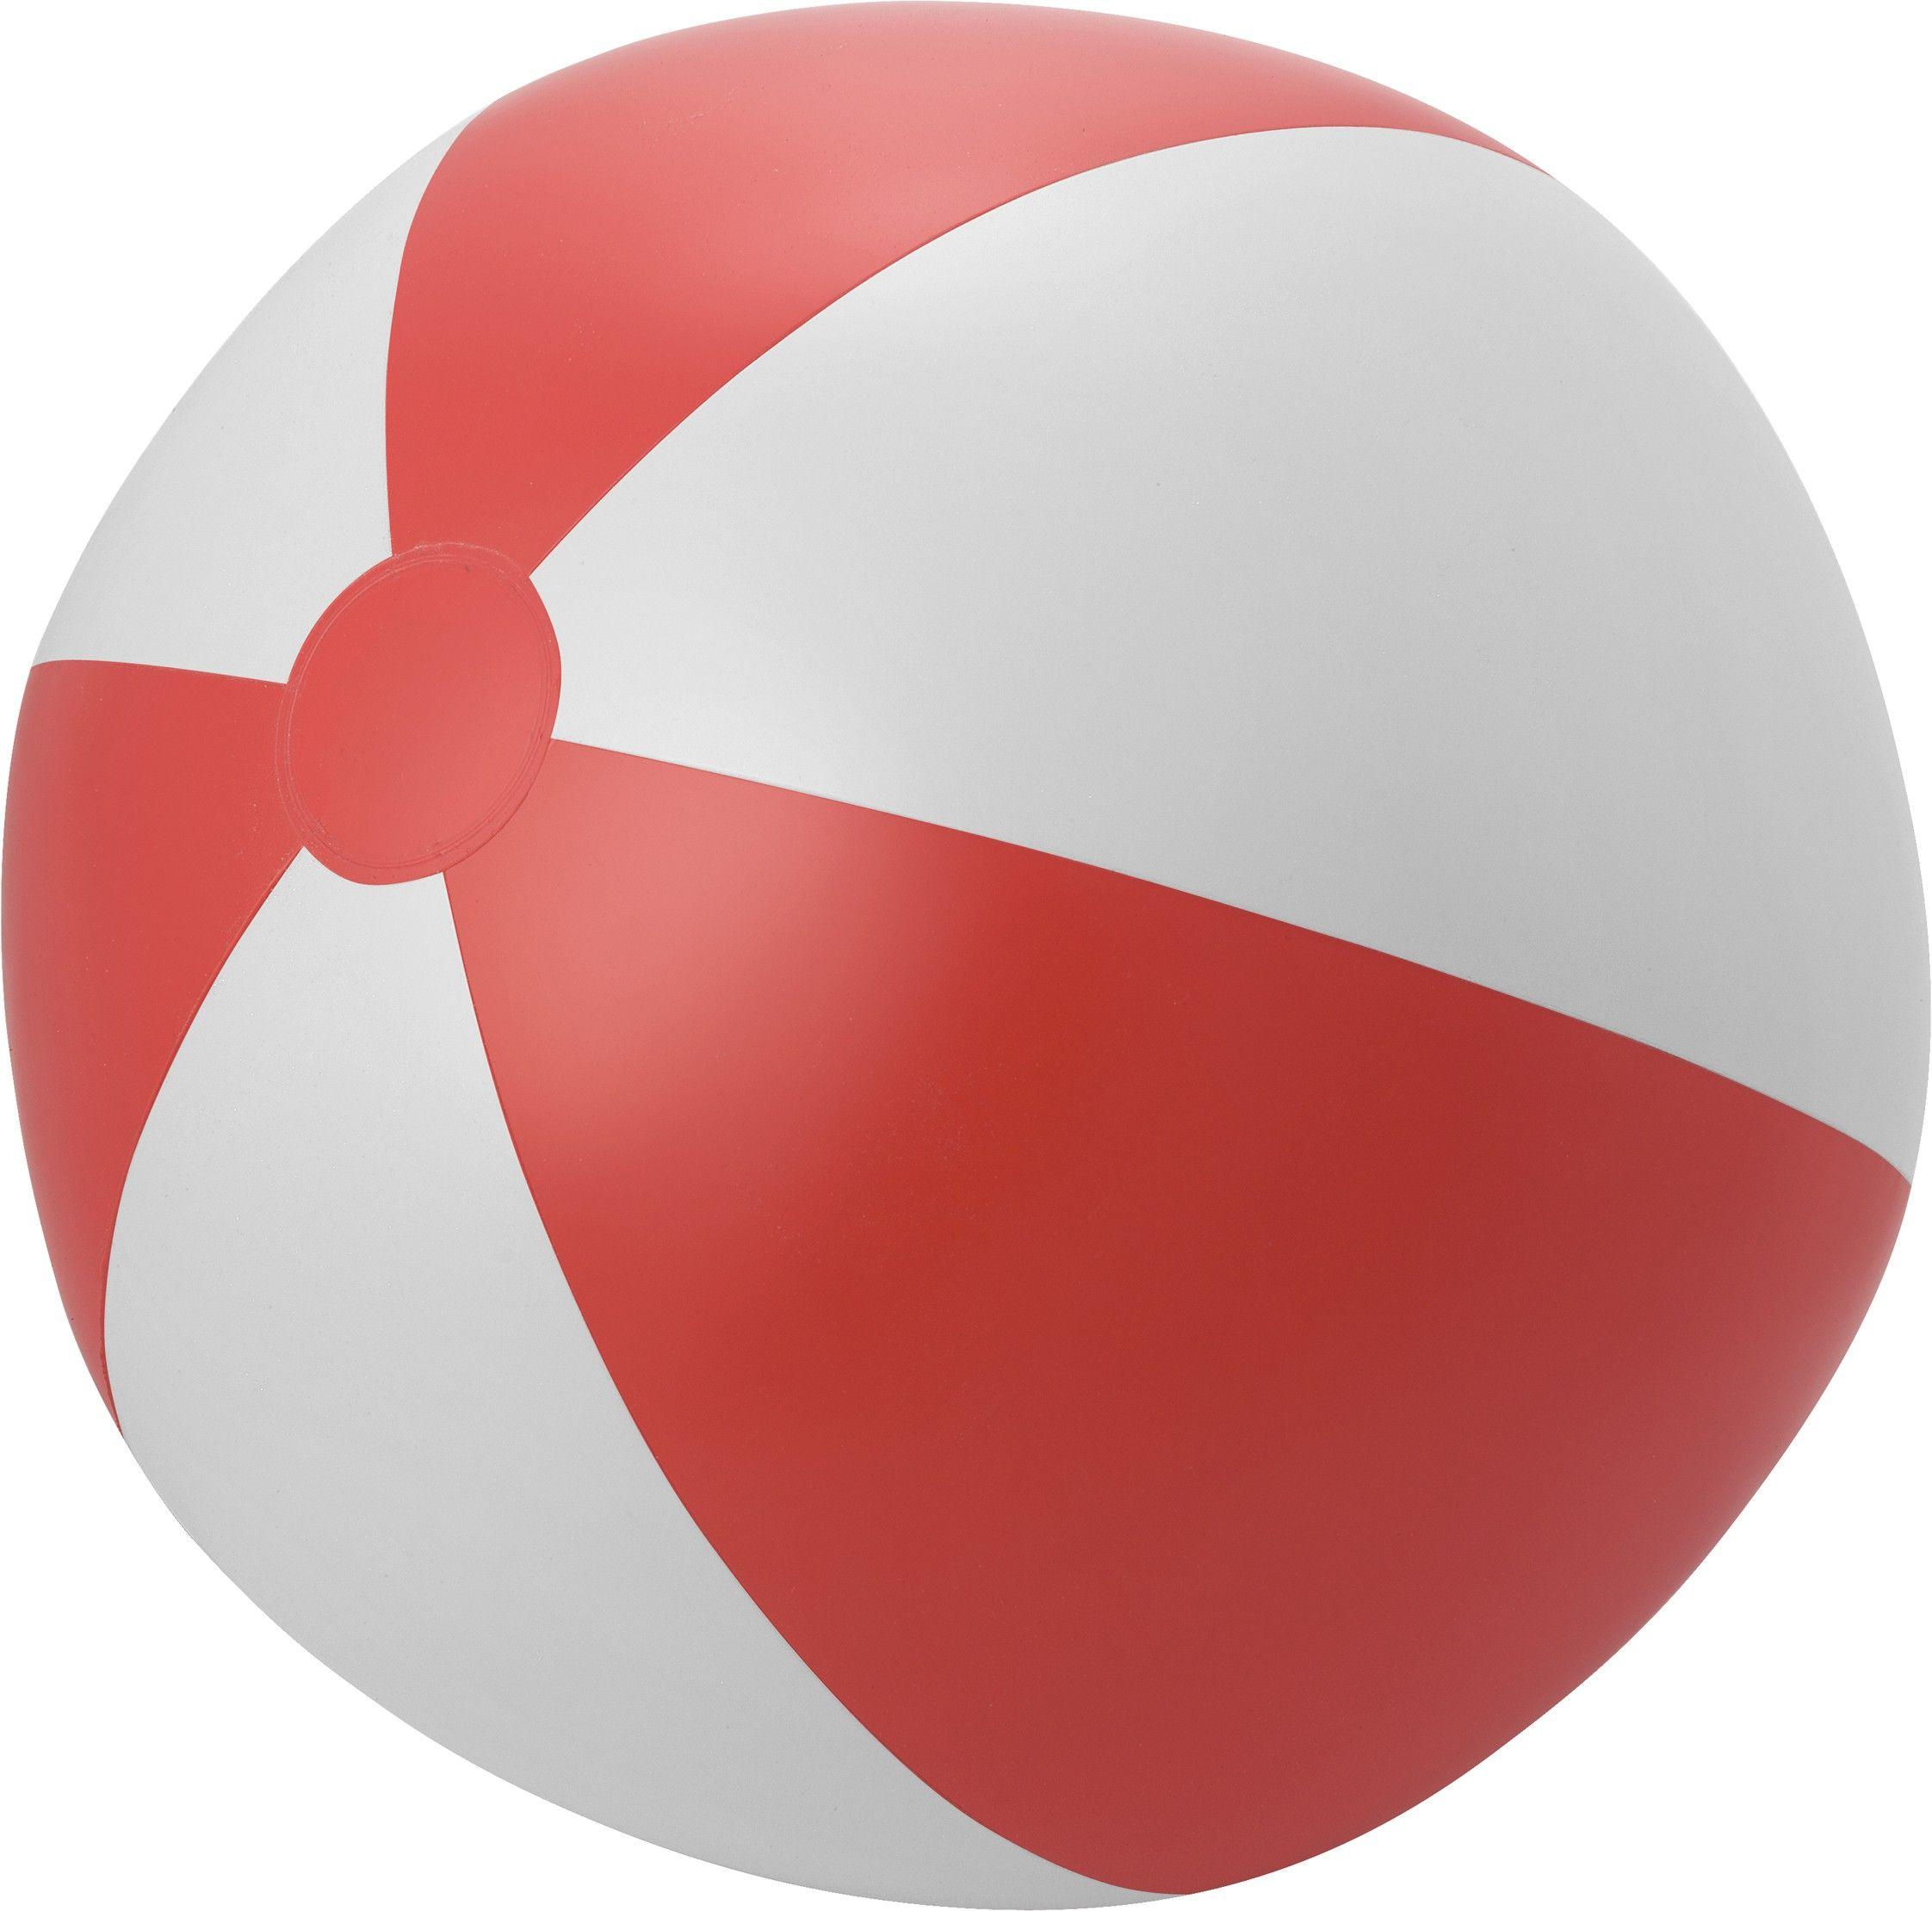 Red and White Sphere Logo - Large PVC beach ball., Red/white (Inflatable beach equipment ...